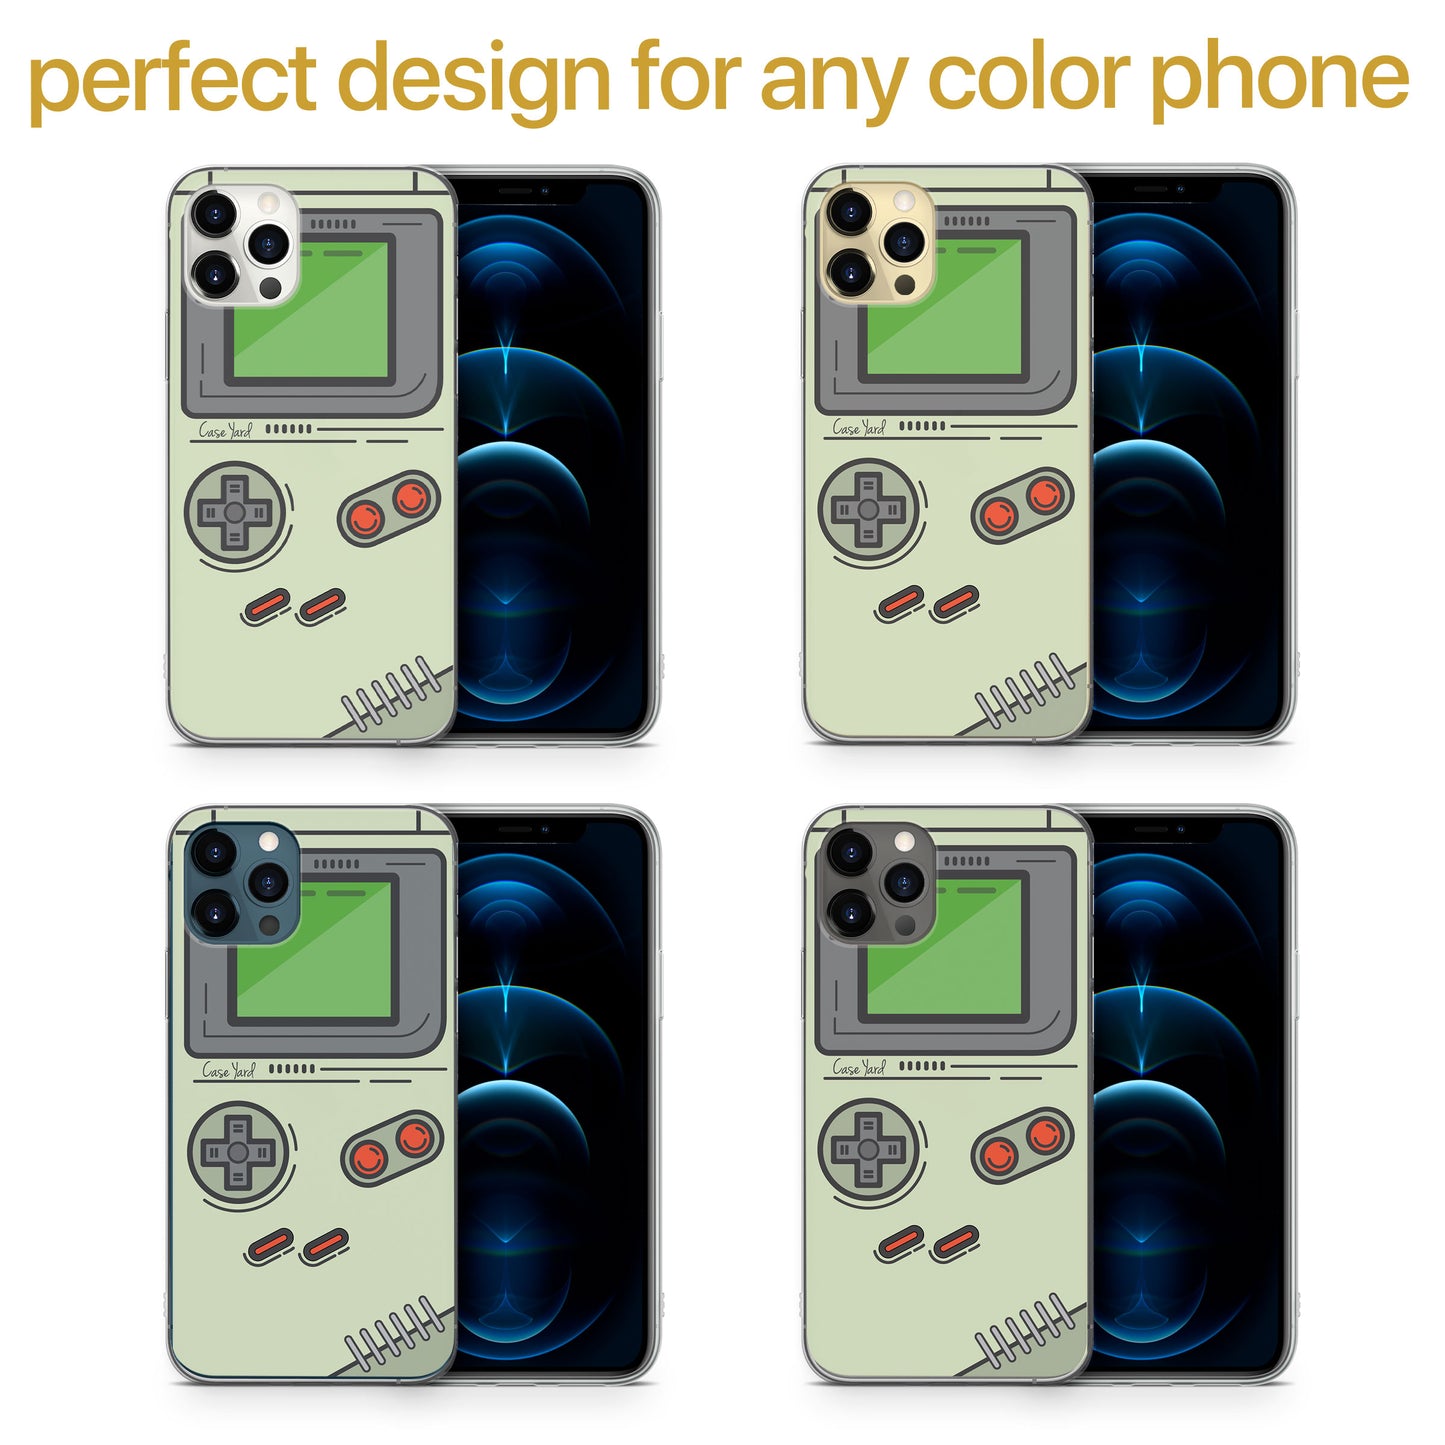 TPU Clear case with (CaseBoy) Design for iPhone & Samsung Phones